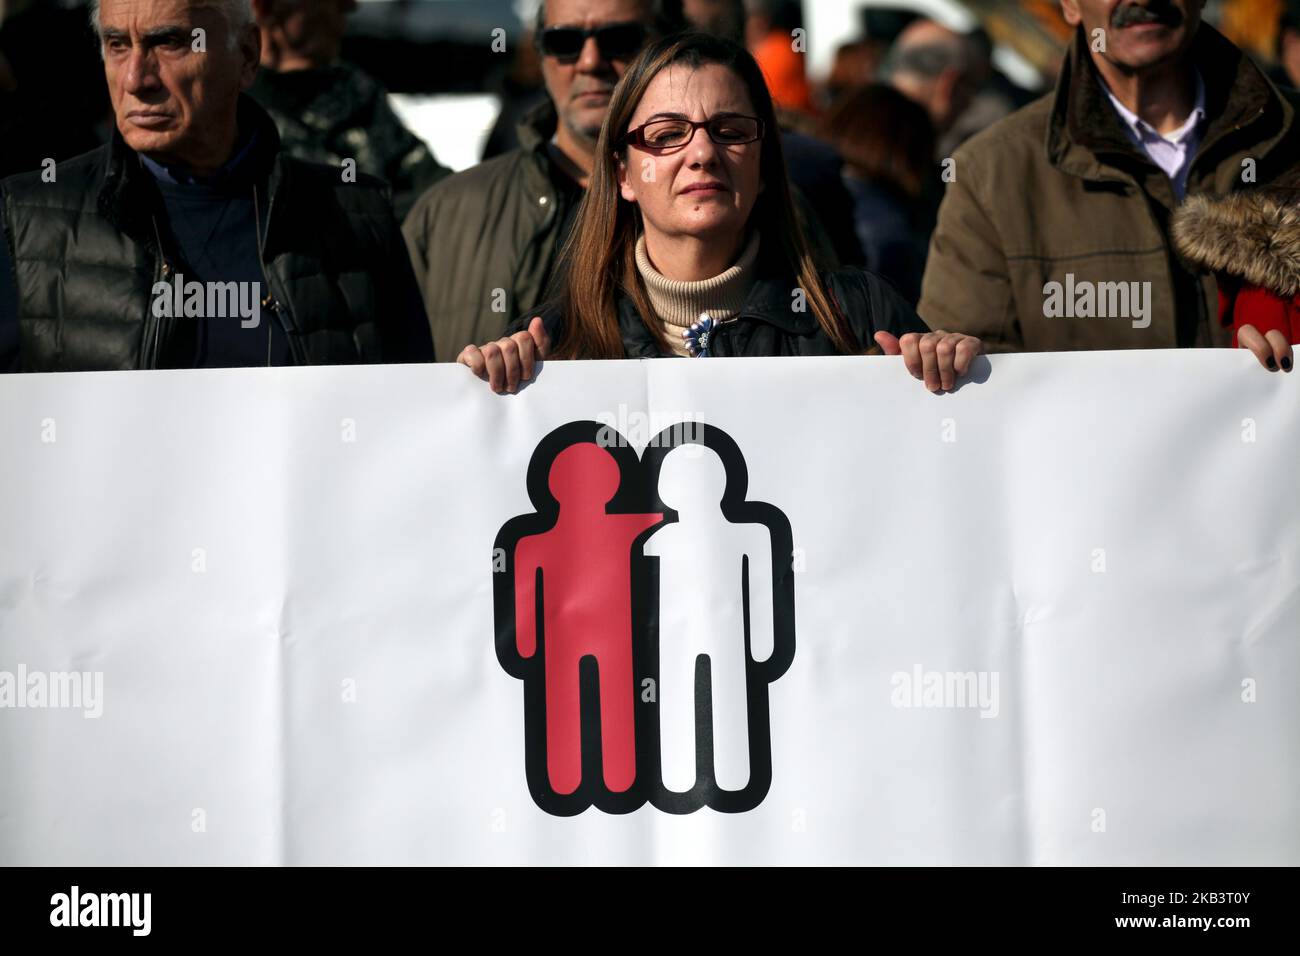 People protest for disabled rights on the occasion of the International Day for Persons with Disabilities in Athens, Greece on December 3, 2018. Protesters demand wage and social welfare since they have been eliminated by years of austerity measures. (Photo by Giorgos Georgiou/NurPhoto) Stock Photo